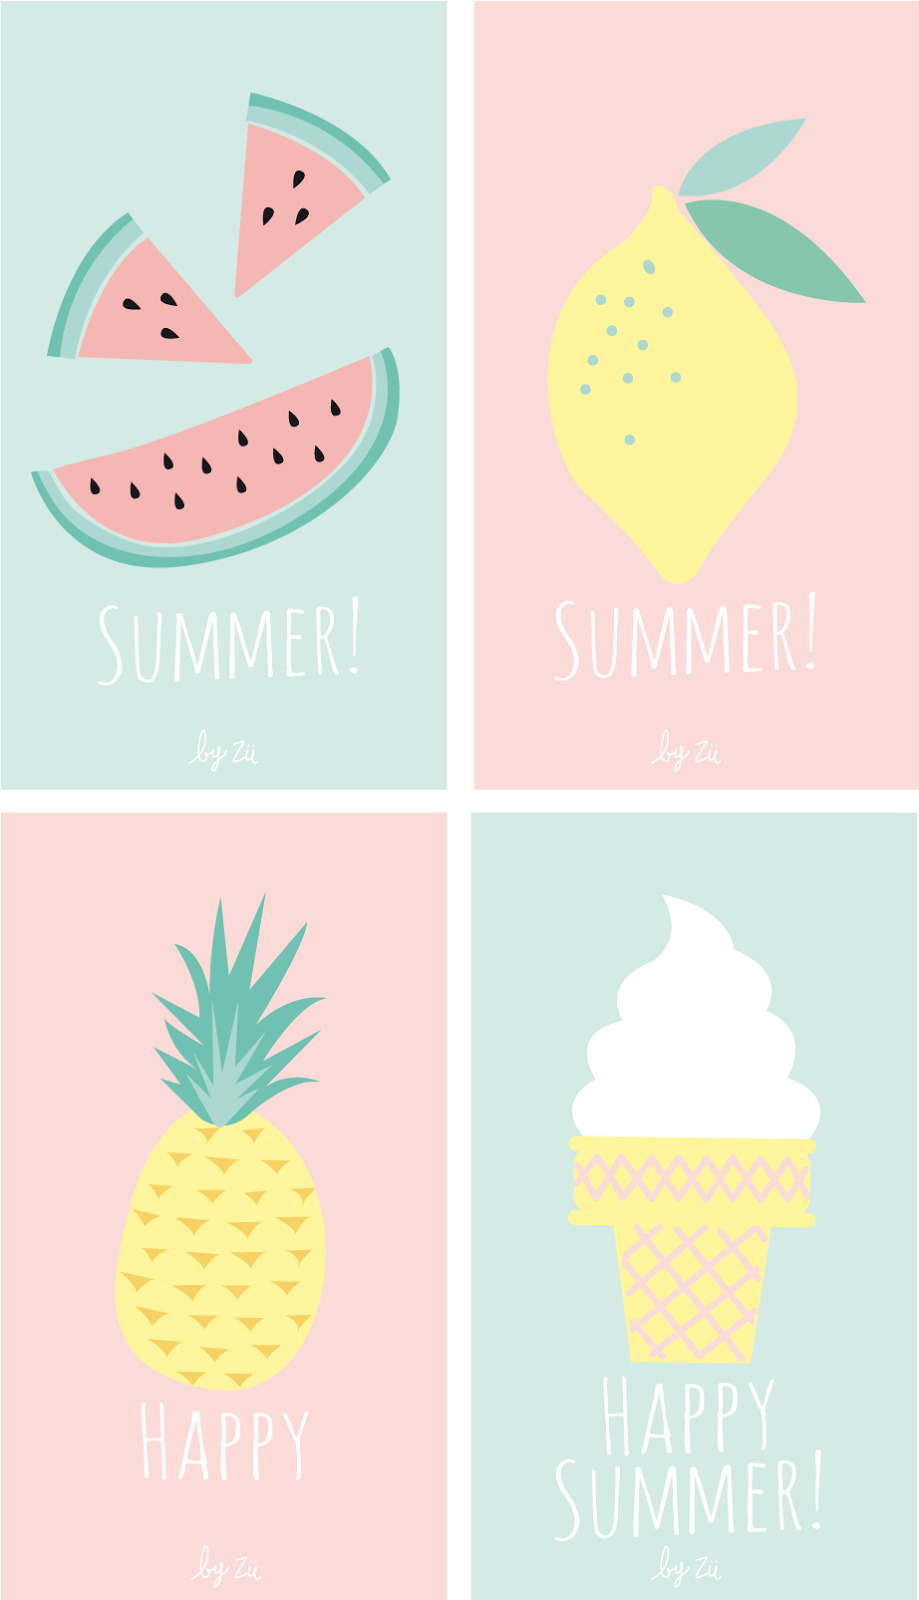 Watermelon and Pineapple Wallpaper